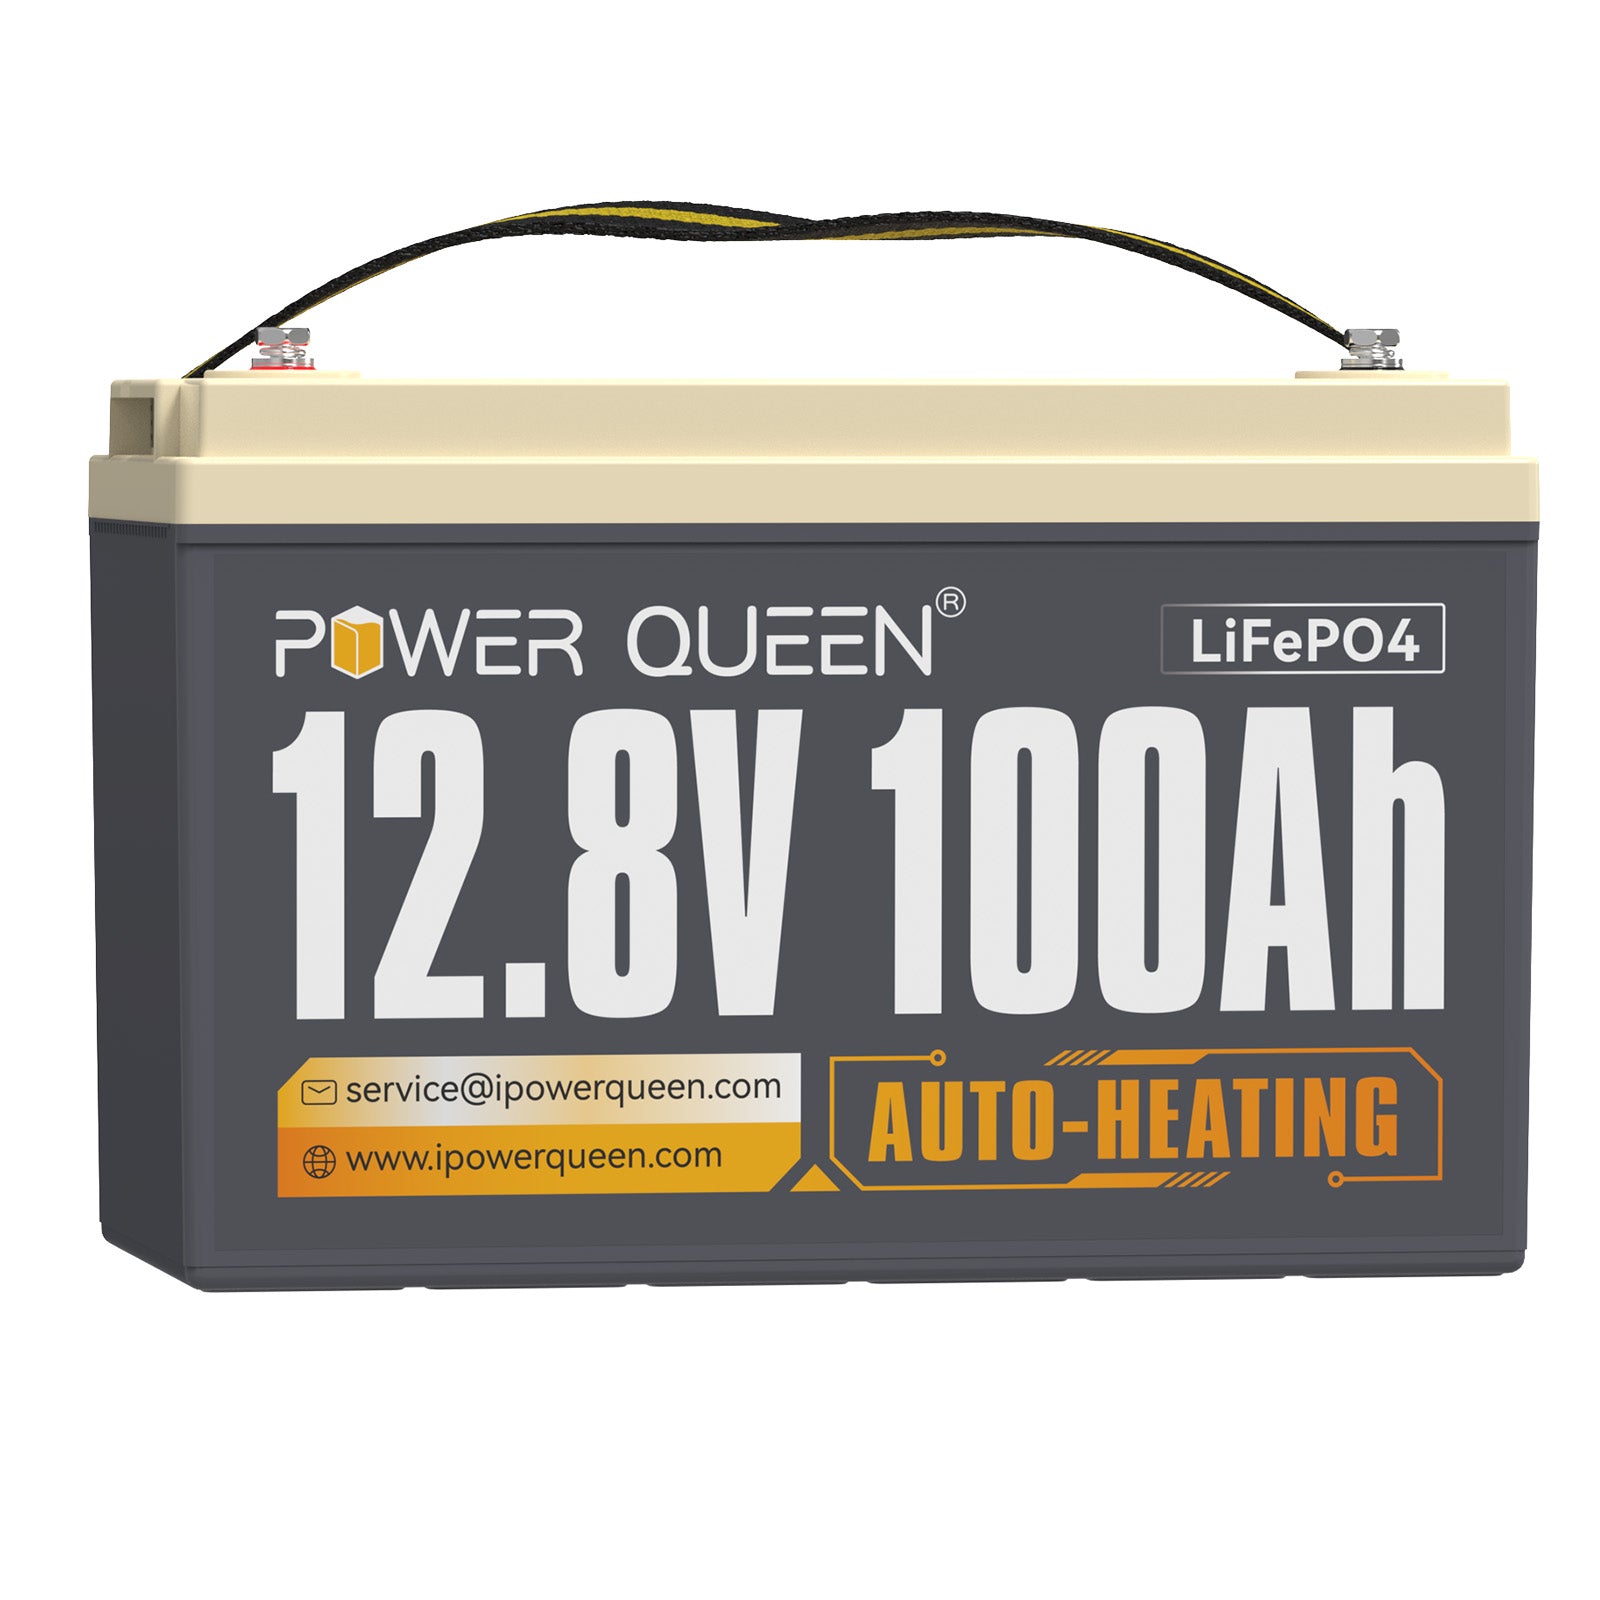 Power Queen 12.8V 100Ah Self-Heating LiFePO4 Battery, Built-in 100A BMS,Match BCI Group 31 Battery Box